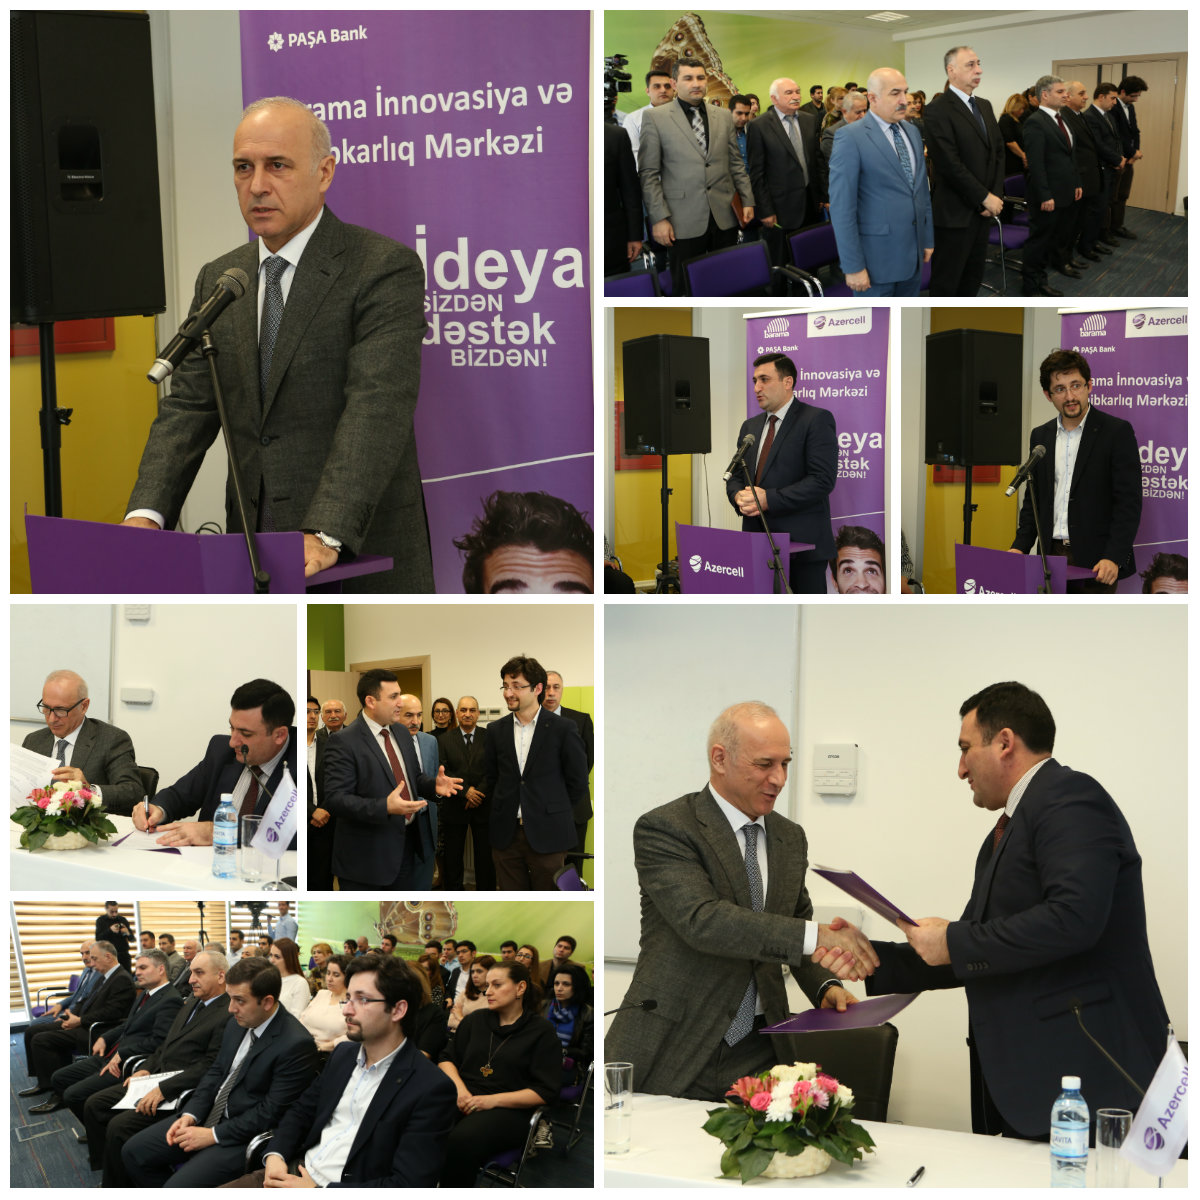 Oil and Industry University students provided with opportunity of cooperation